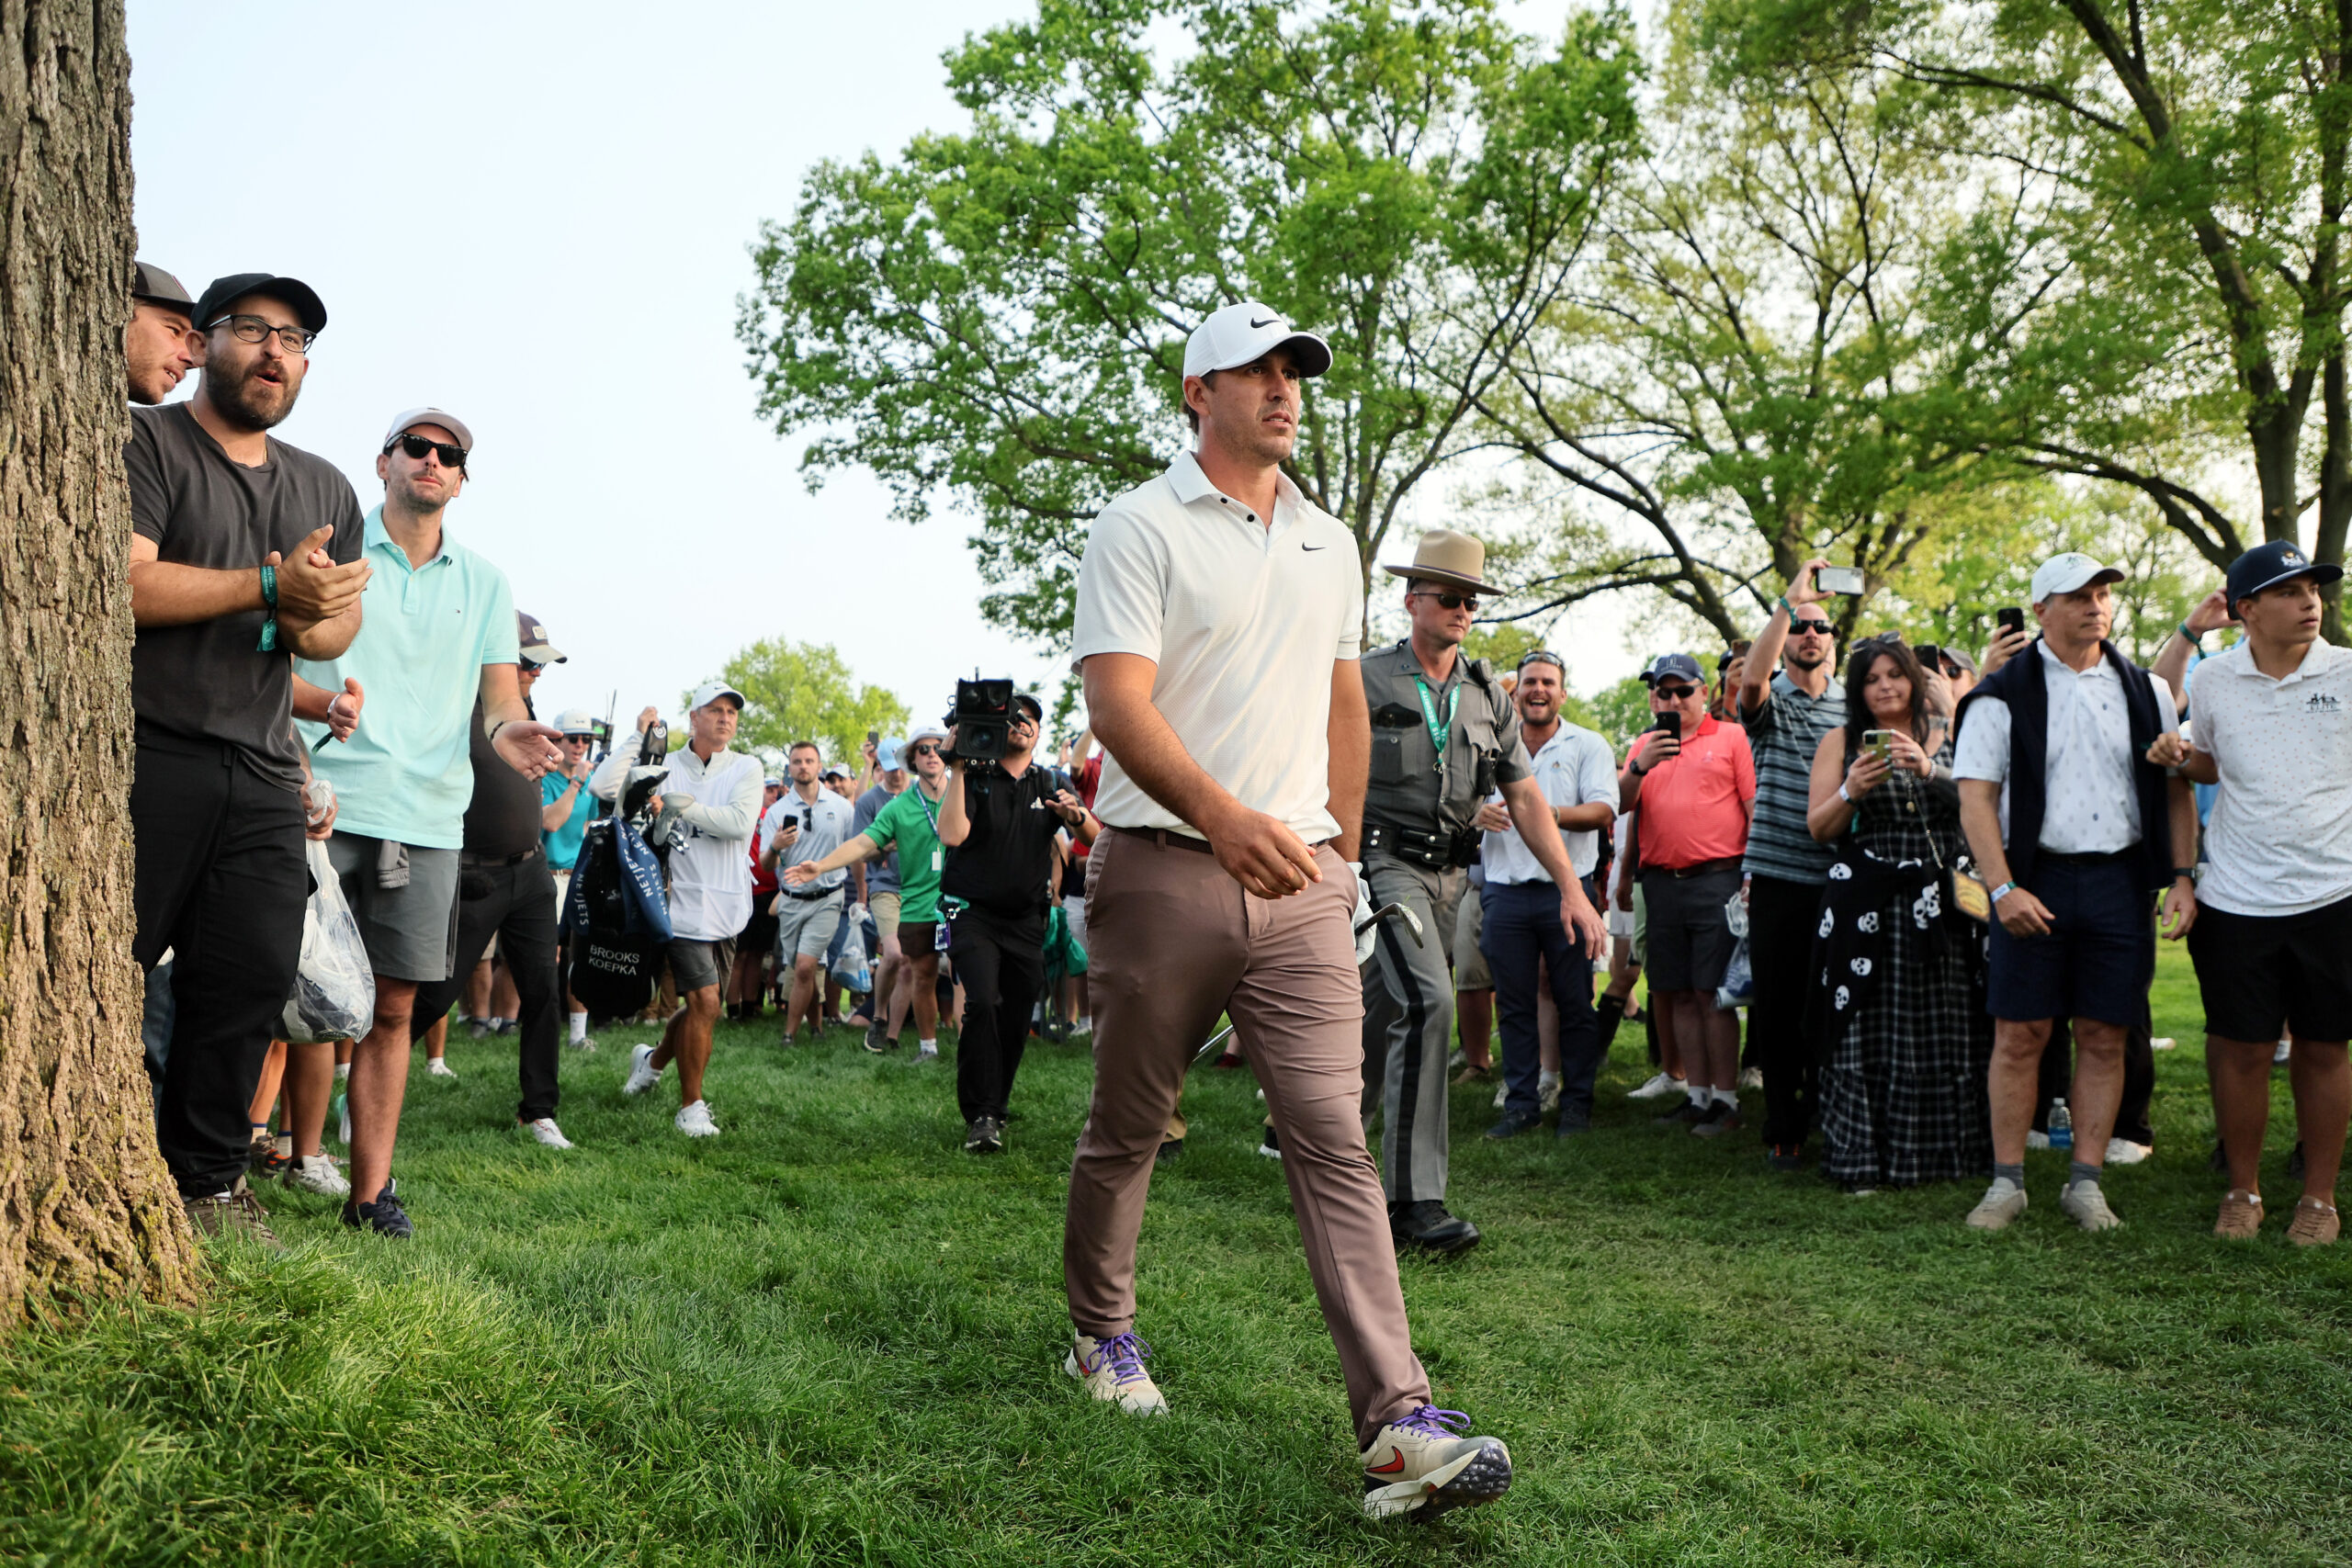 ROCHESTER, NEW YORK - MAY 21: Brooks Koepka of the United States plays a second shot on the 17th hole as fans look on during the final round of the 2023 PGA Championship at Oak Hill Country Club on May 21, 2023 in Rochester, New York. (Photo by Andy Lyons/Getty Images)